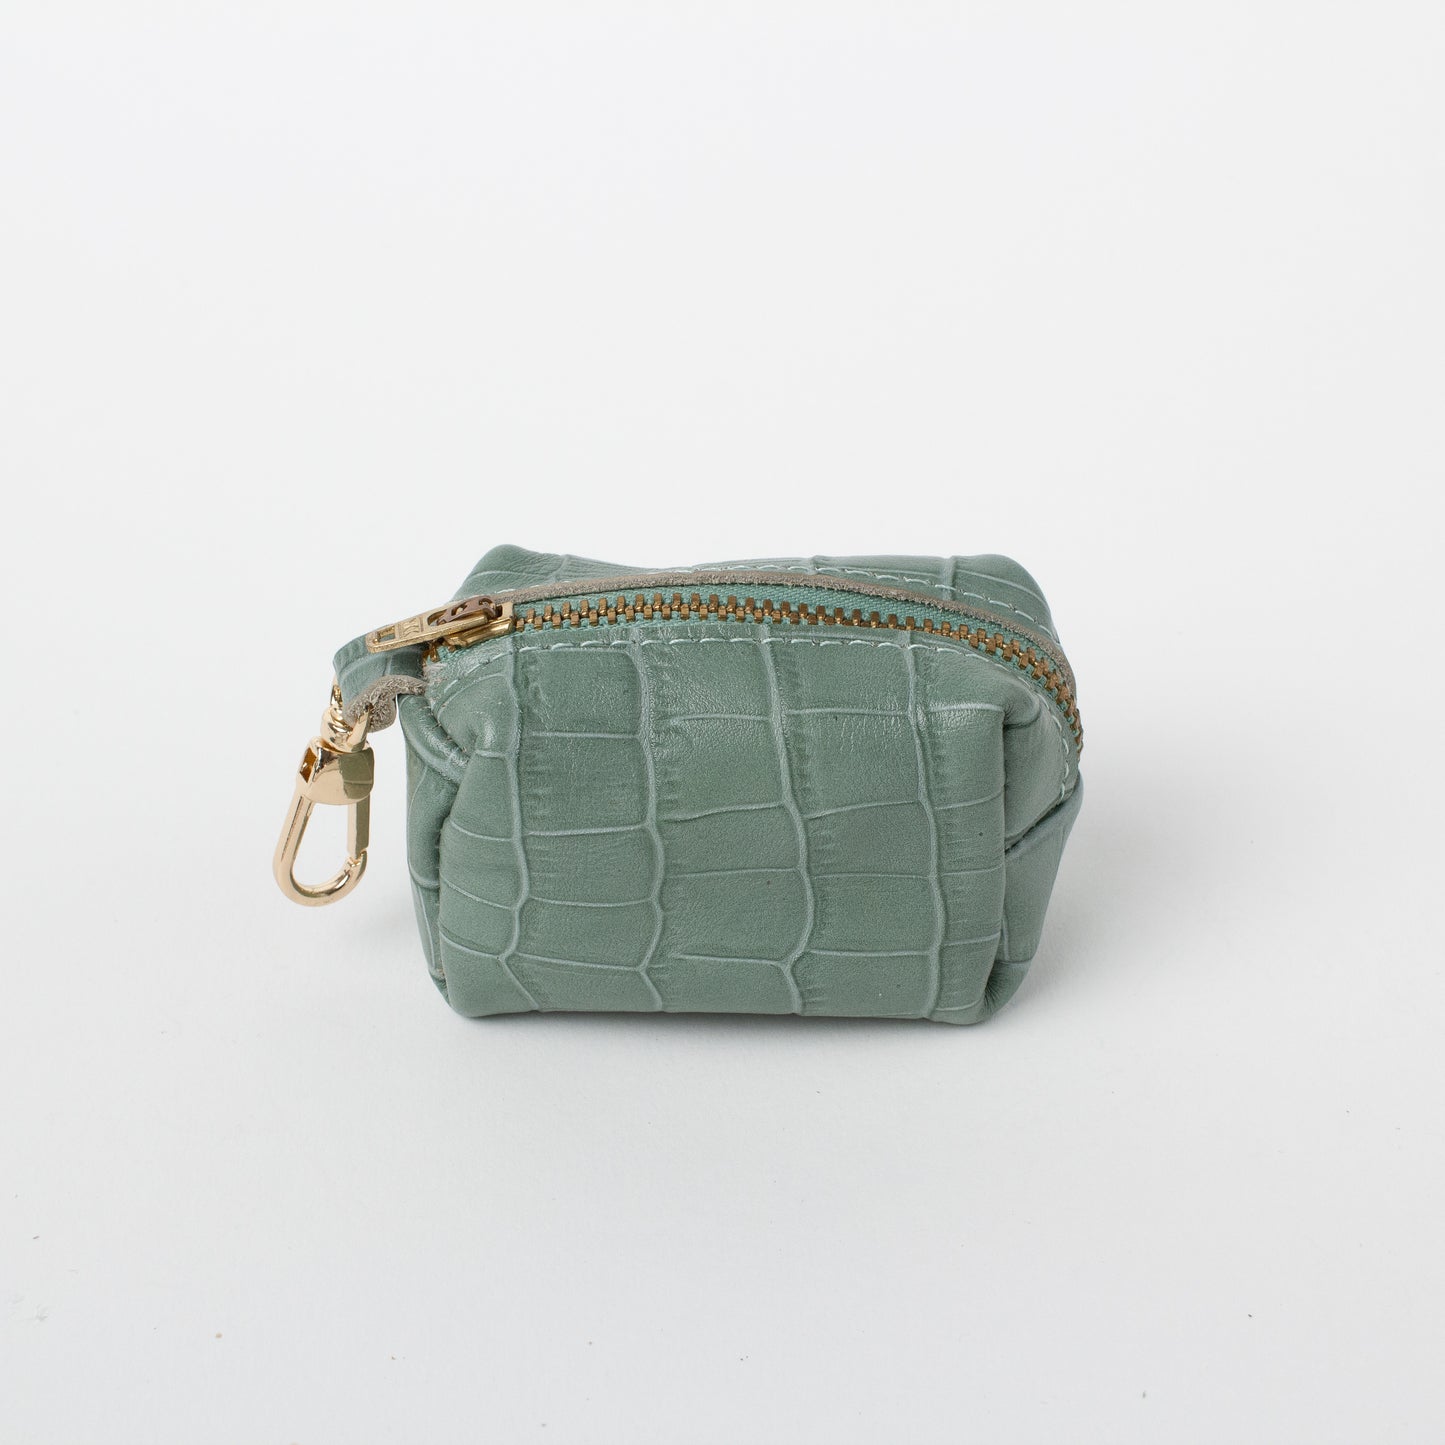 Willow Walks leather poo bag with croc effect in sage green